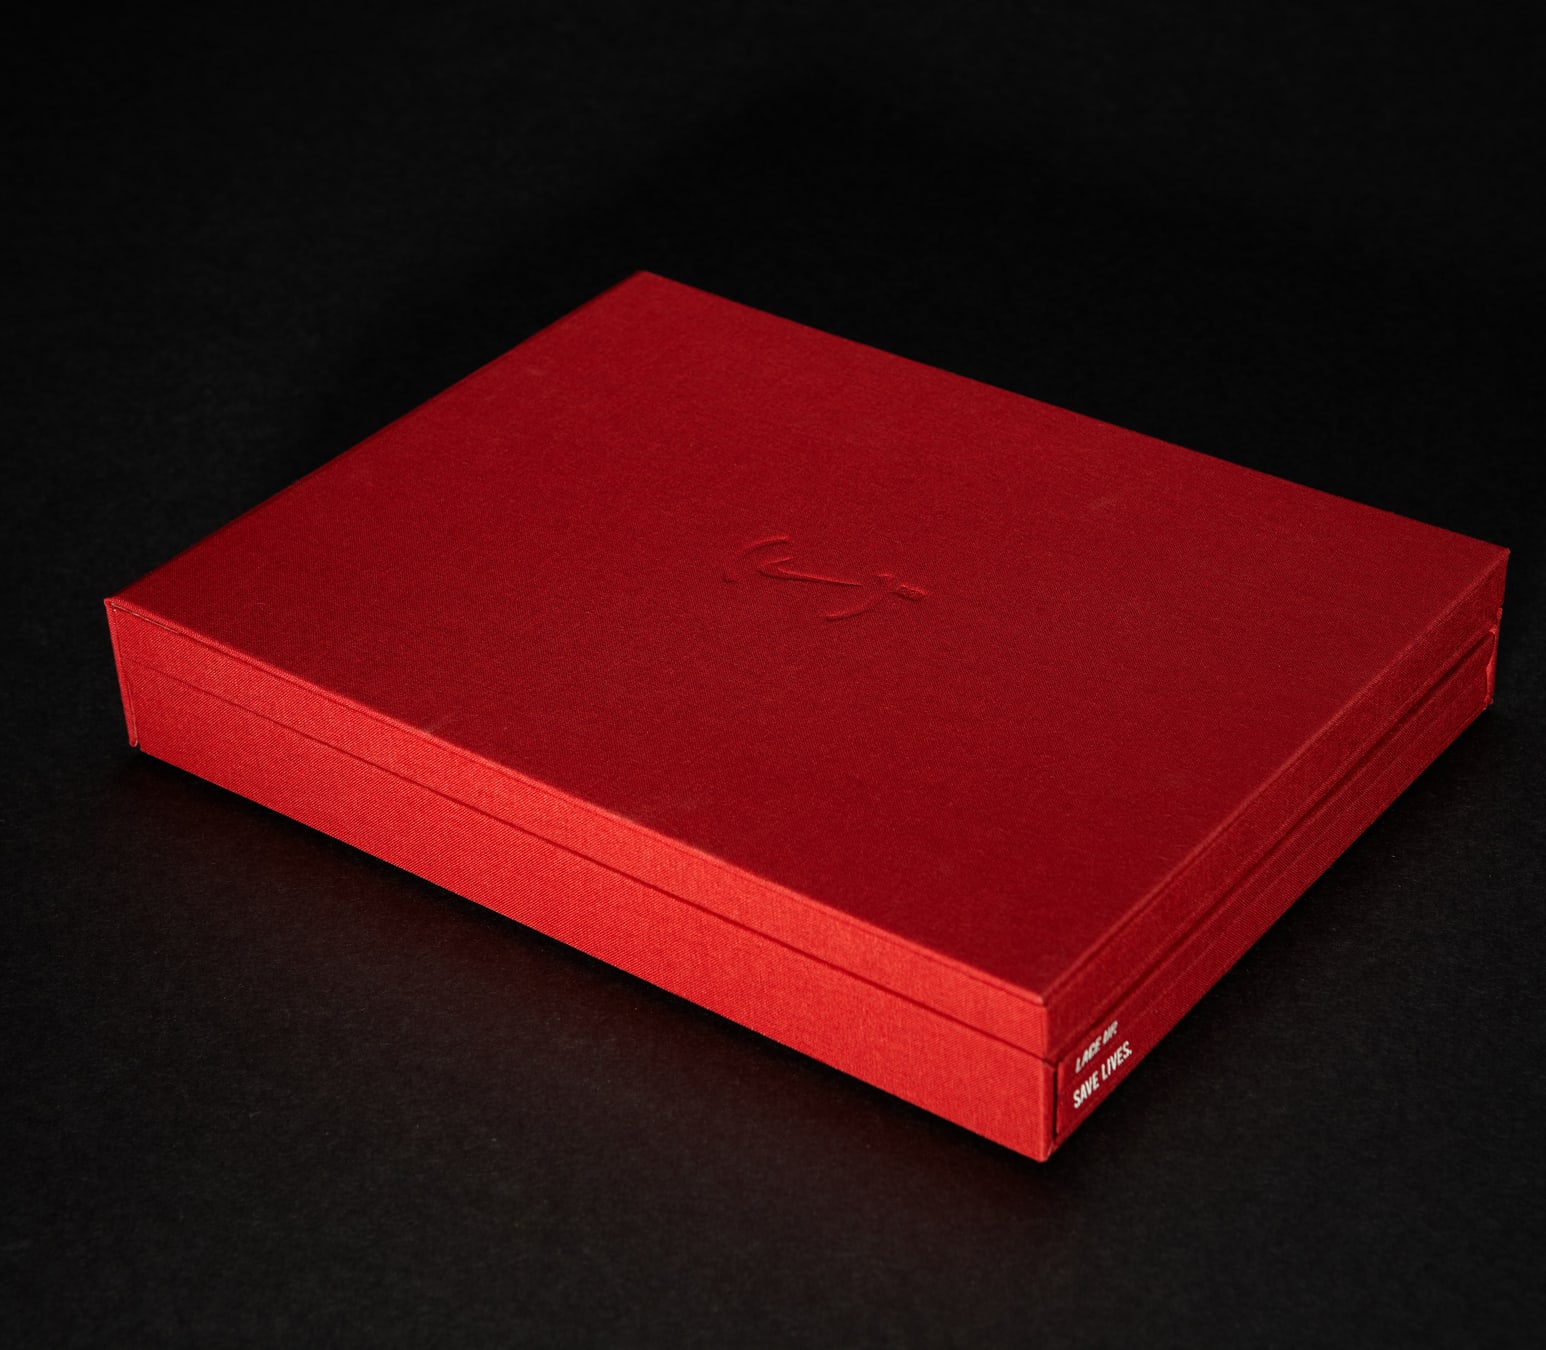 NIKE Red book and program design